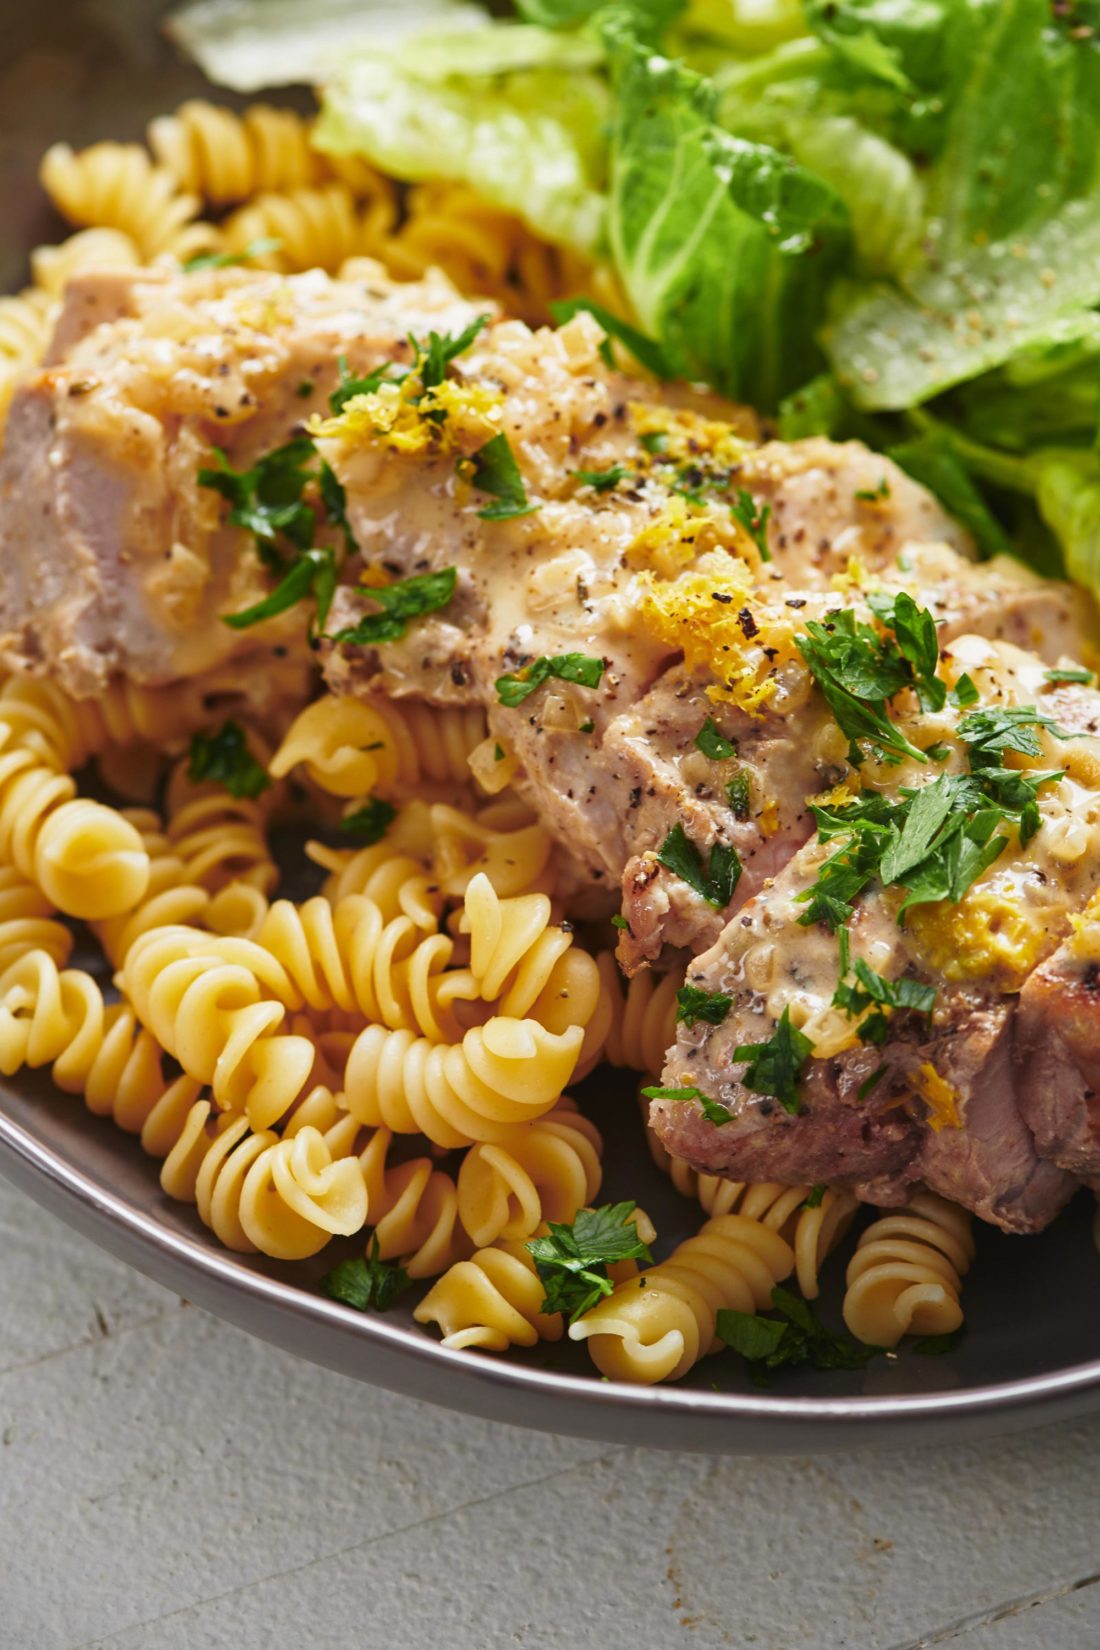 Slices of Creamy Mustard Pork Chops over noodles on a plate.